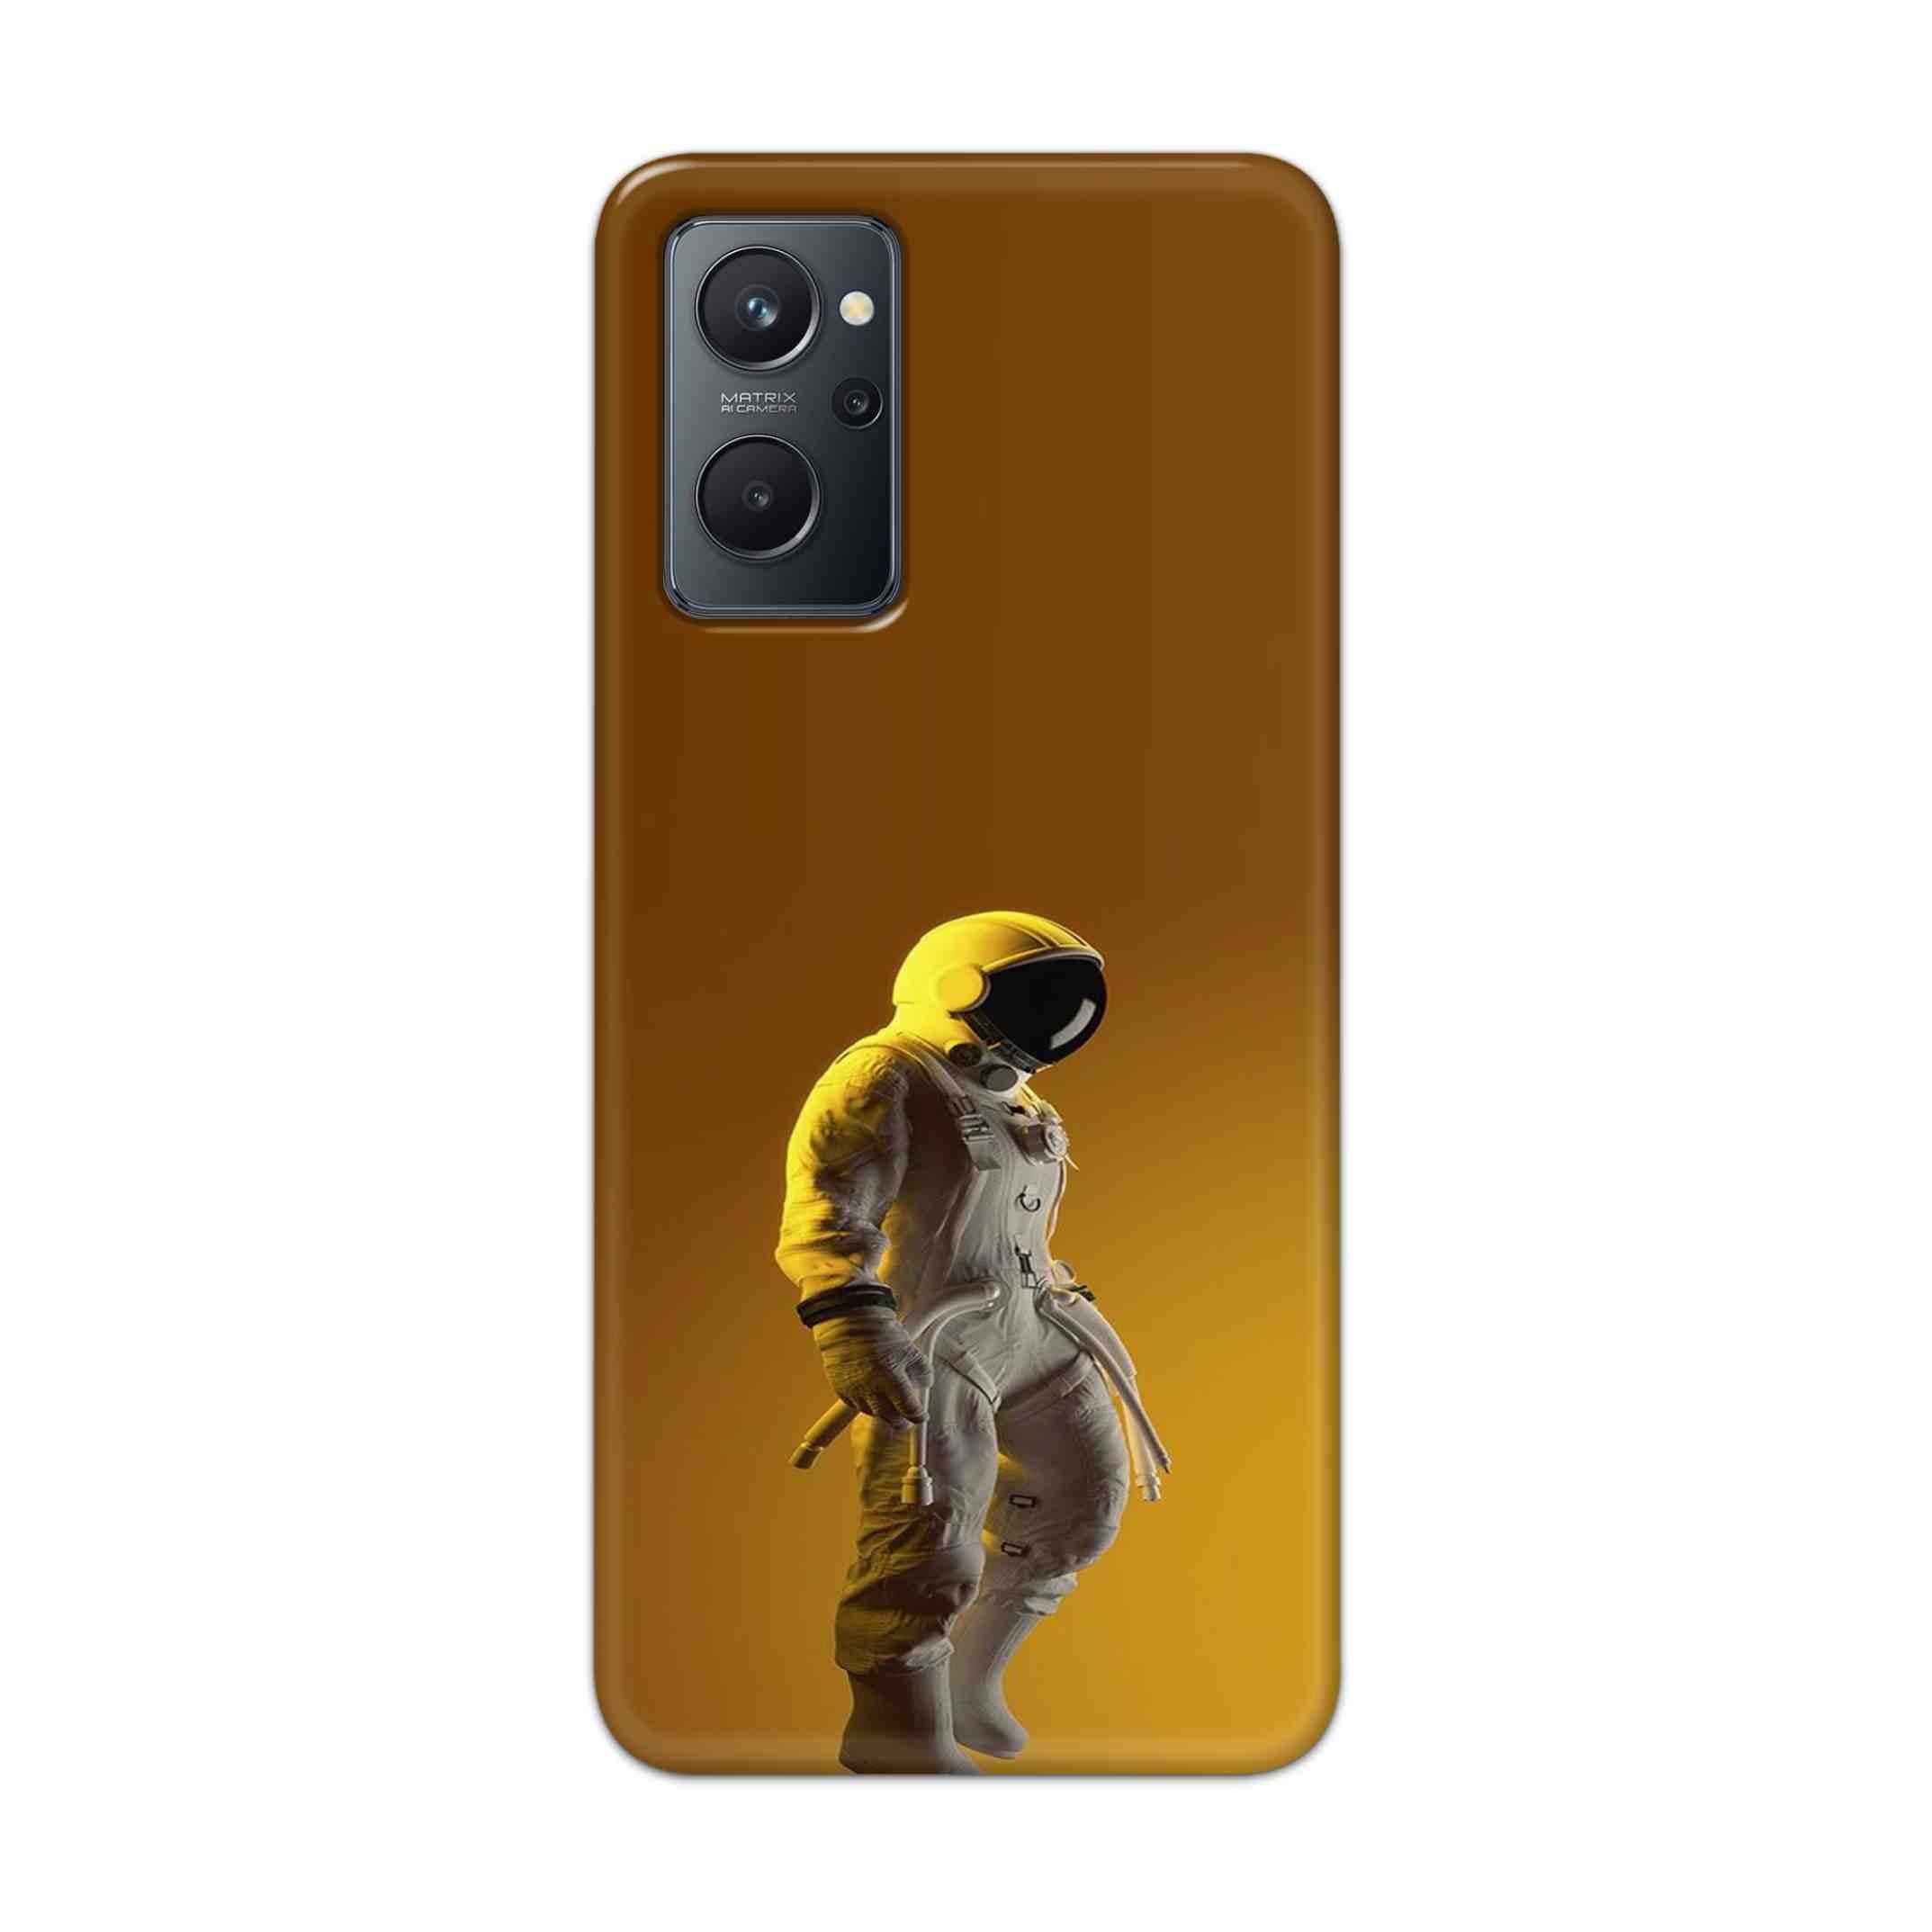 Buy Yellow Astronaut Hard Back Mobile Phone Case Cover For Realme 9i Online